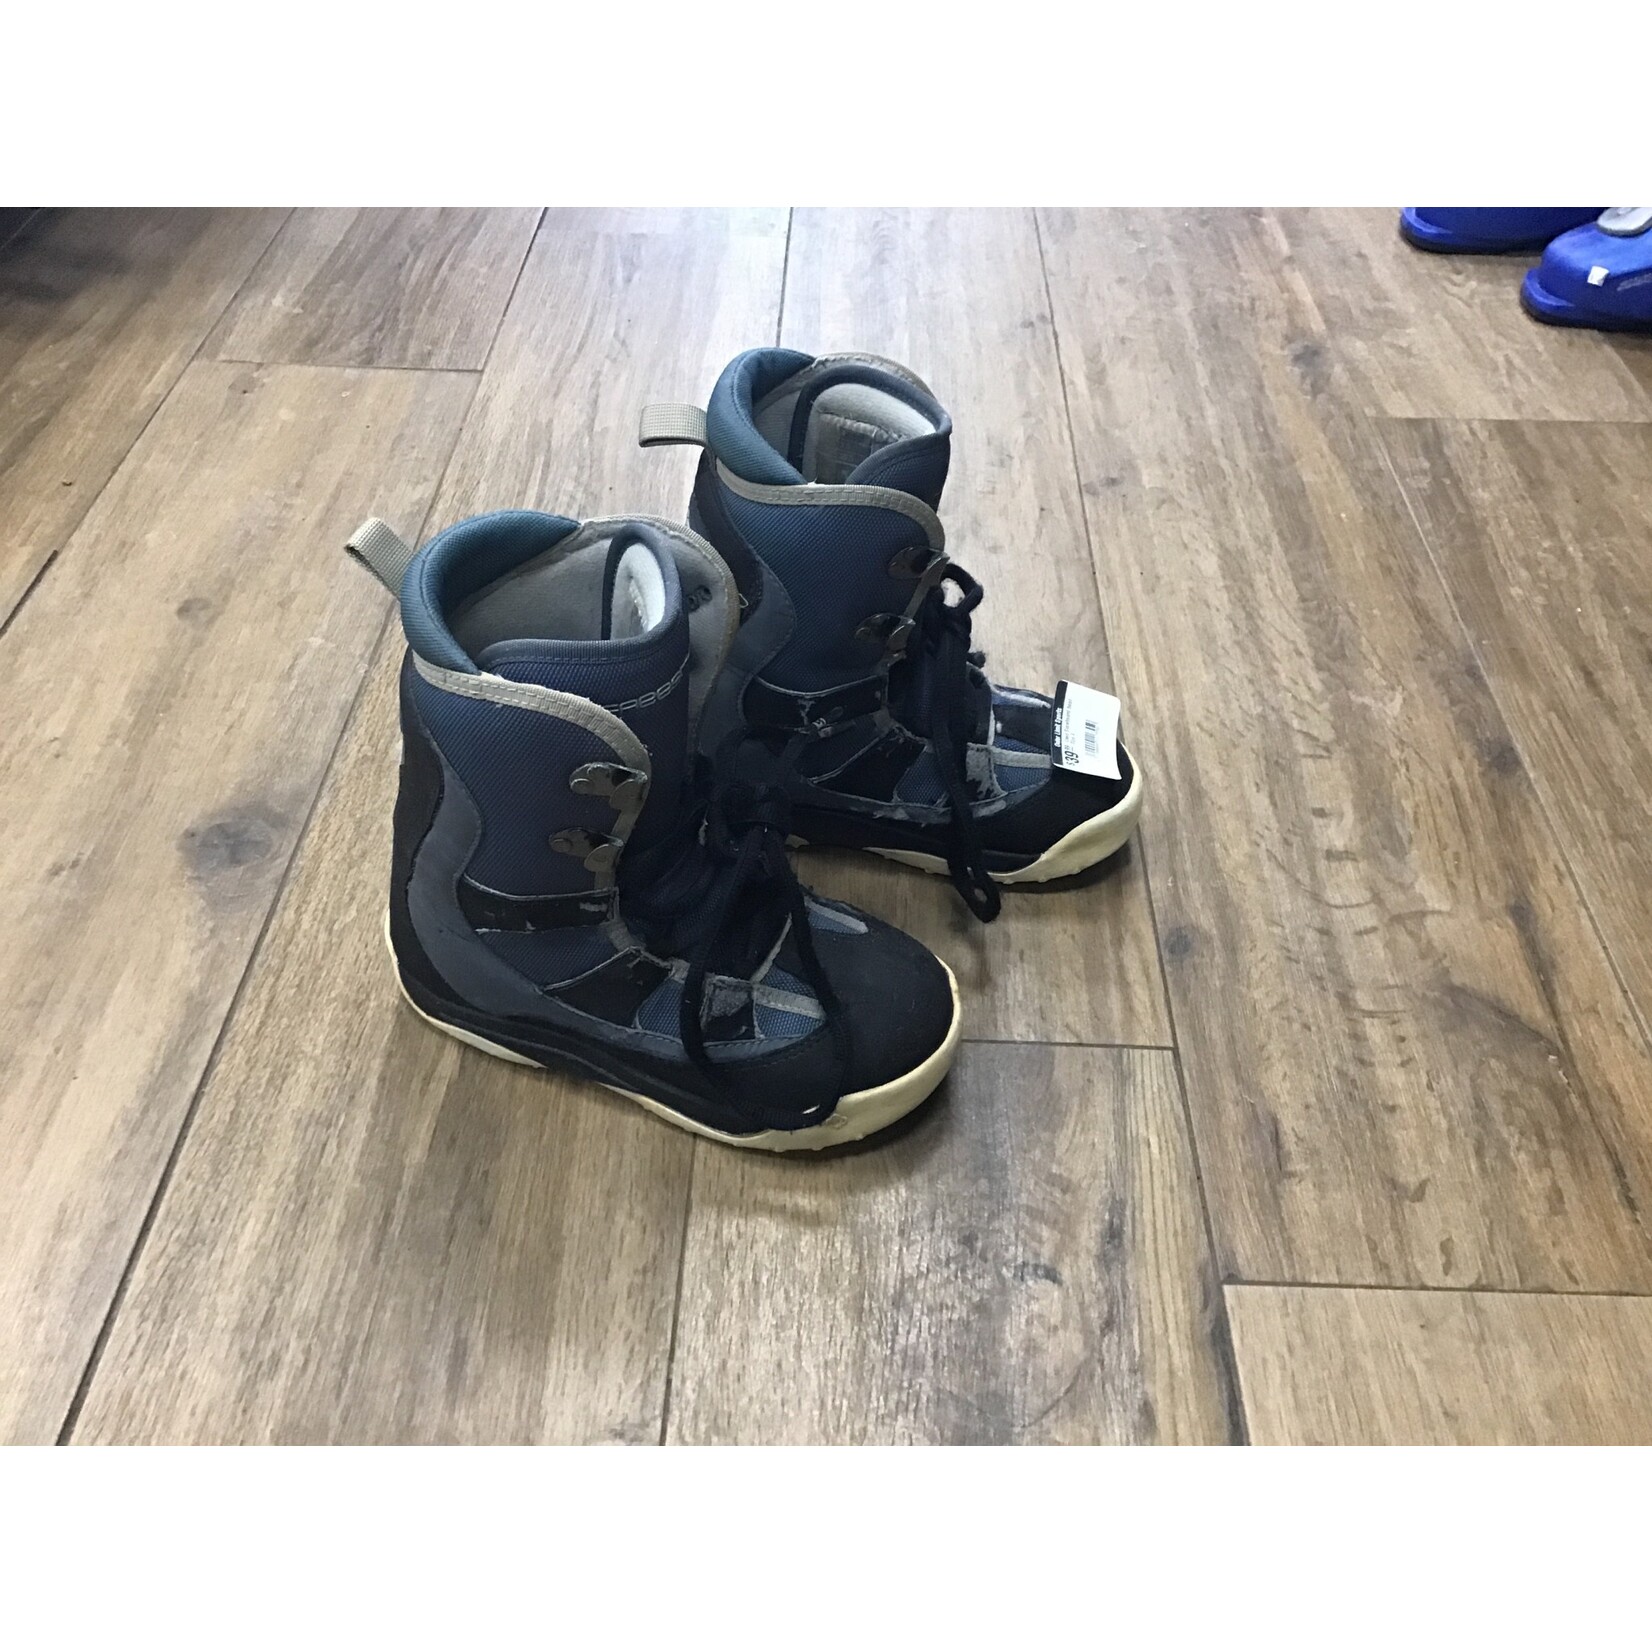 Used Snowboard boot Freestyle Size 4